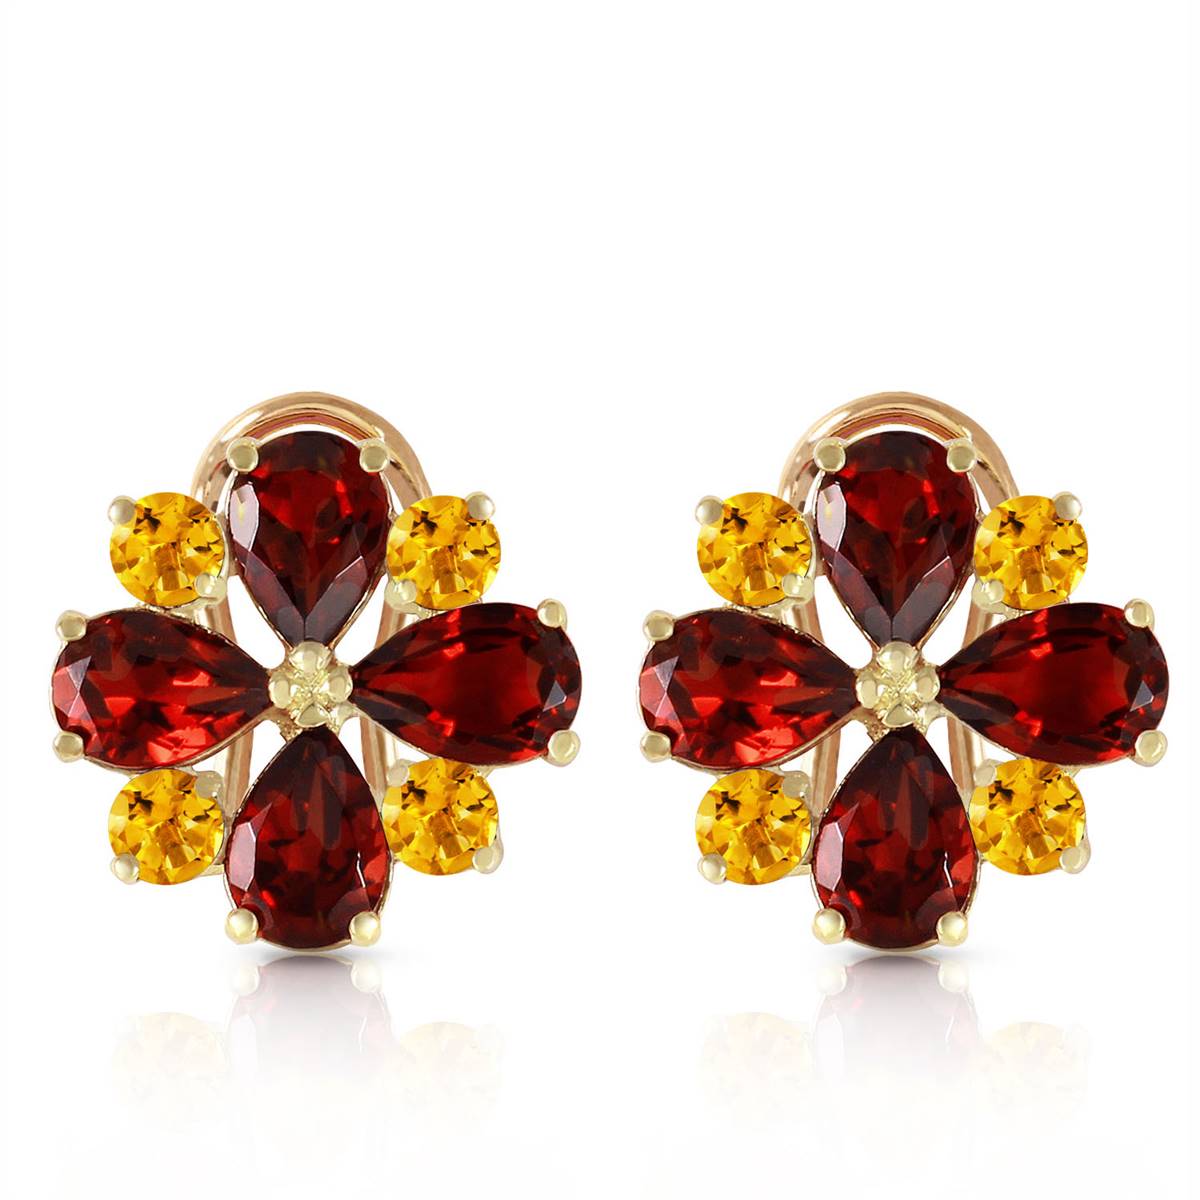 4.85 Carat 14K Solid Yellow Gold French Clips Earrings Garnet Citrine